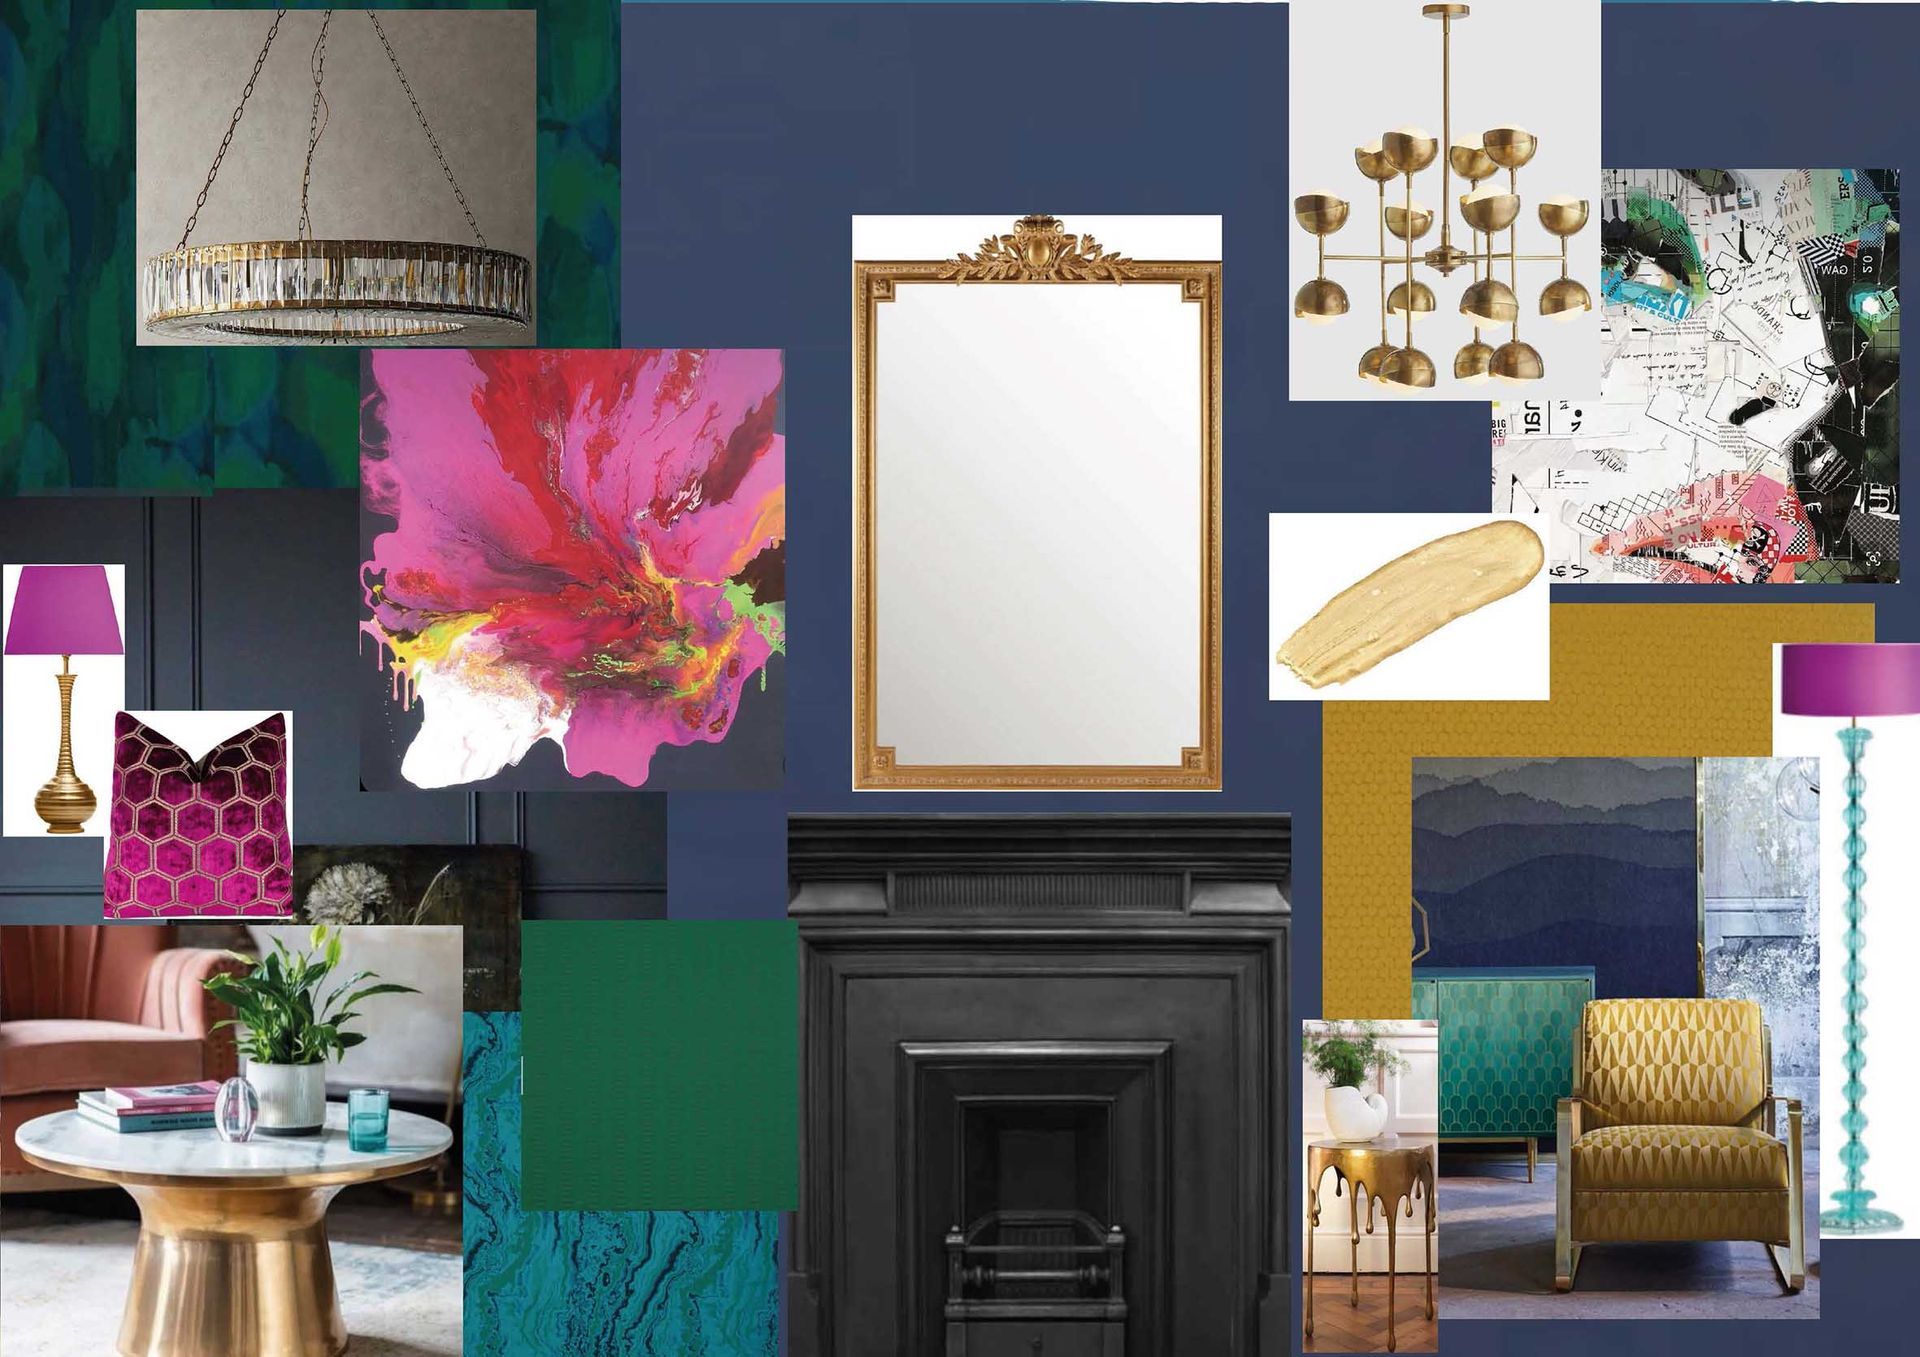 Mood board showing colourful interior. Demonstrating the full design service from K Interiors.